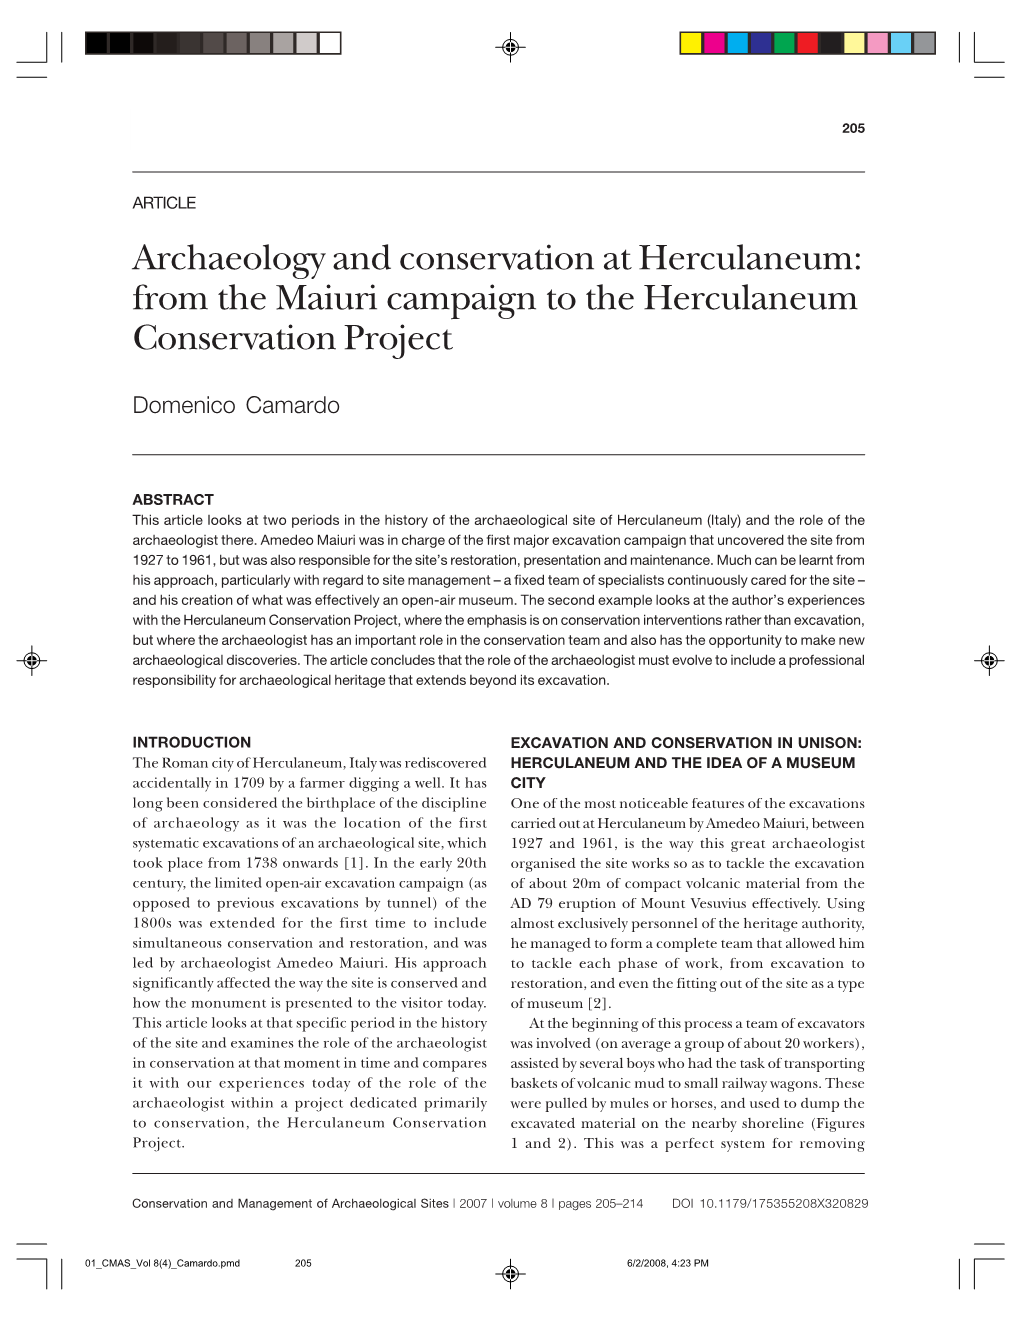 Archaeology and Conservation at Herculaneum: from the Maiuri Campaign to the Herculaneum Conservation Project